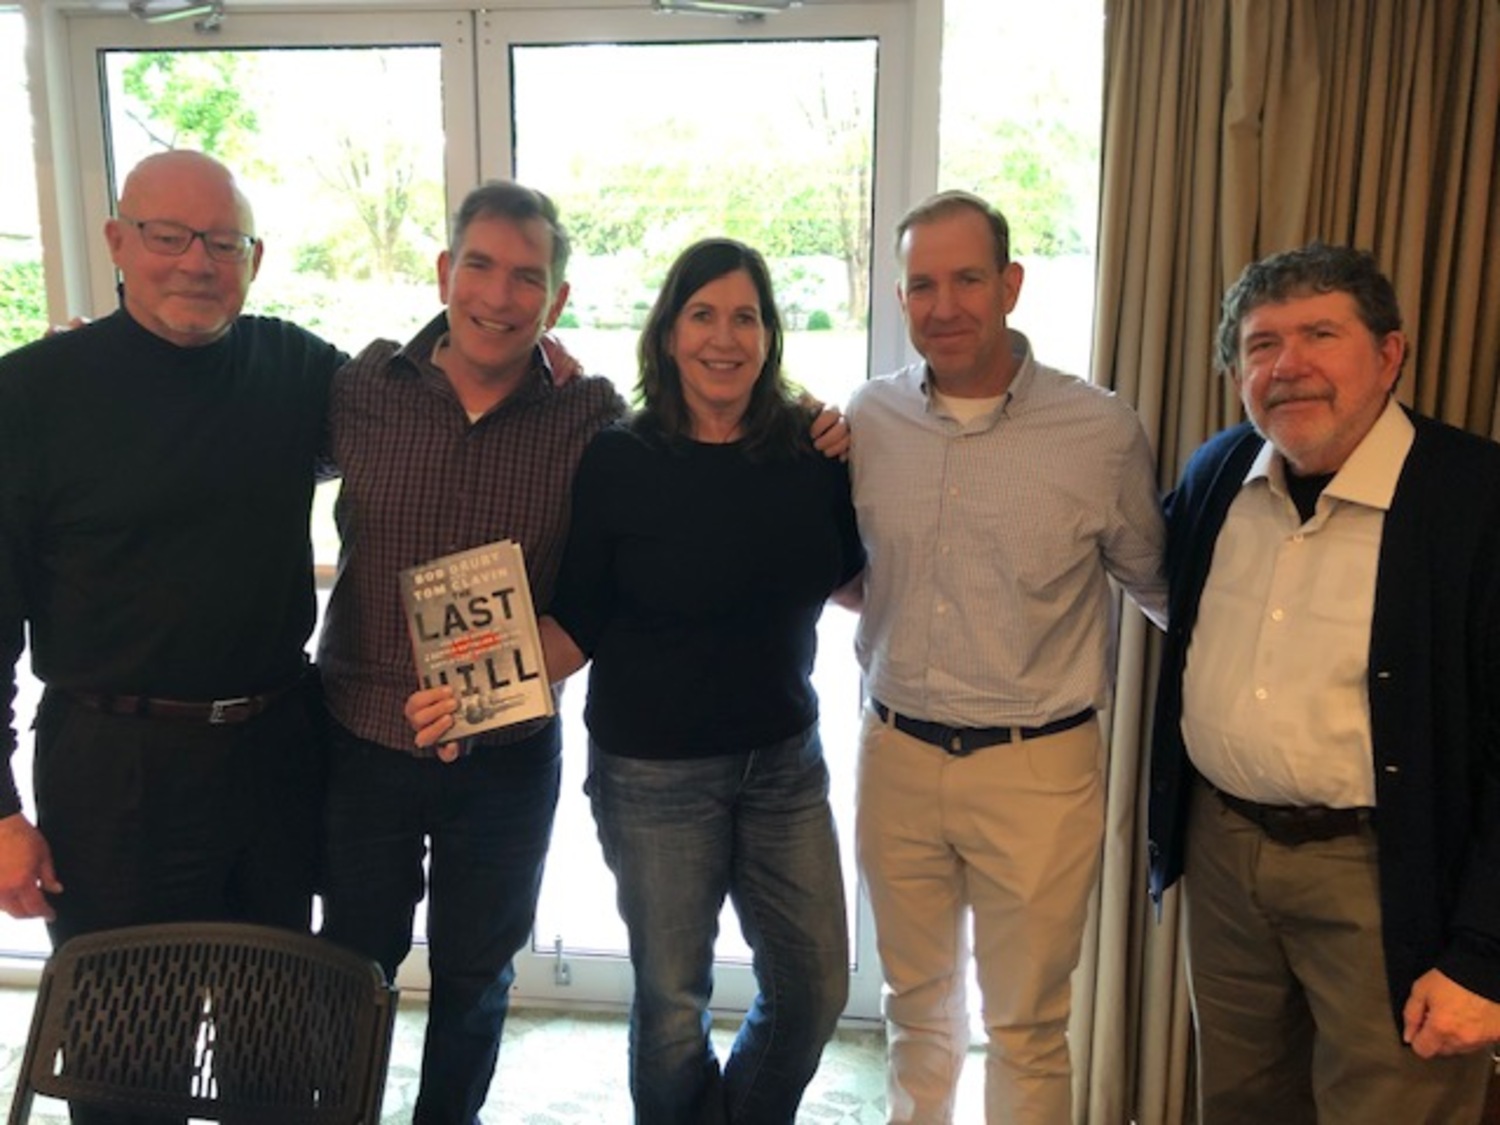 Bob Drury, Jim, Patsy, and Michel Smyth, and Tom Clavin discussed the wartime and peacetime life of Sgt. William Petty, a key figure in Drury and Clavin's book, 